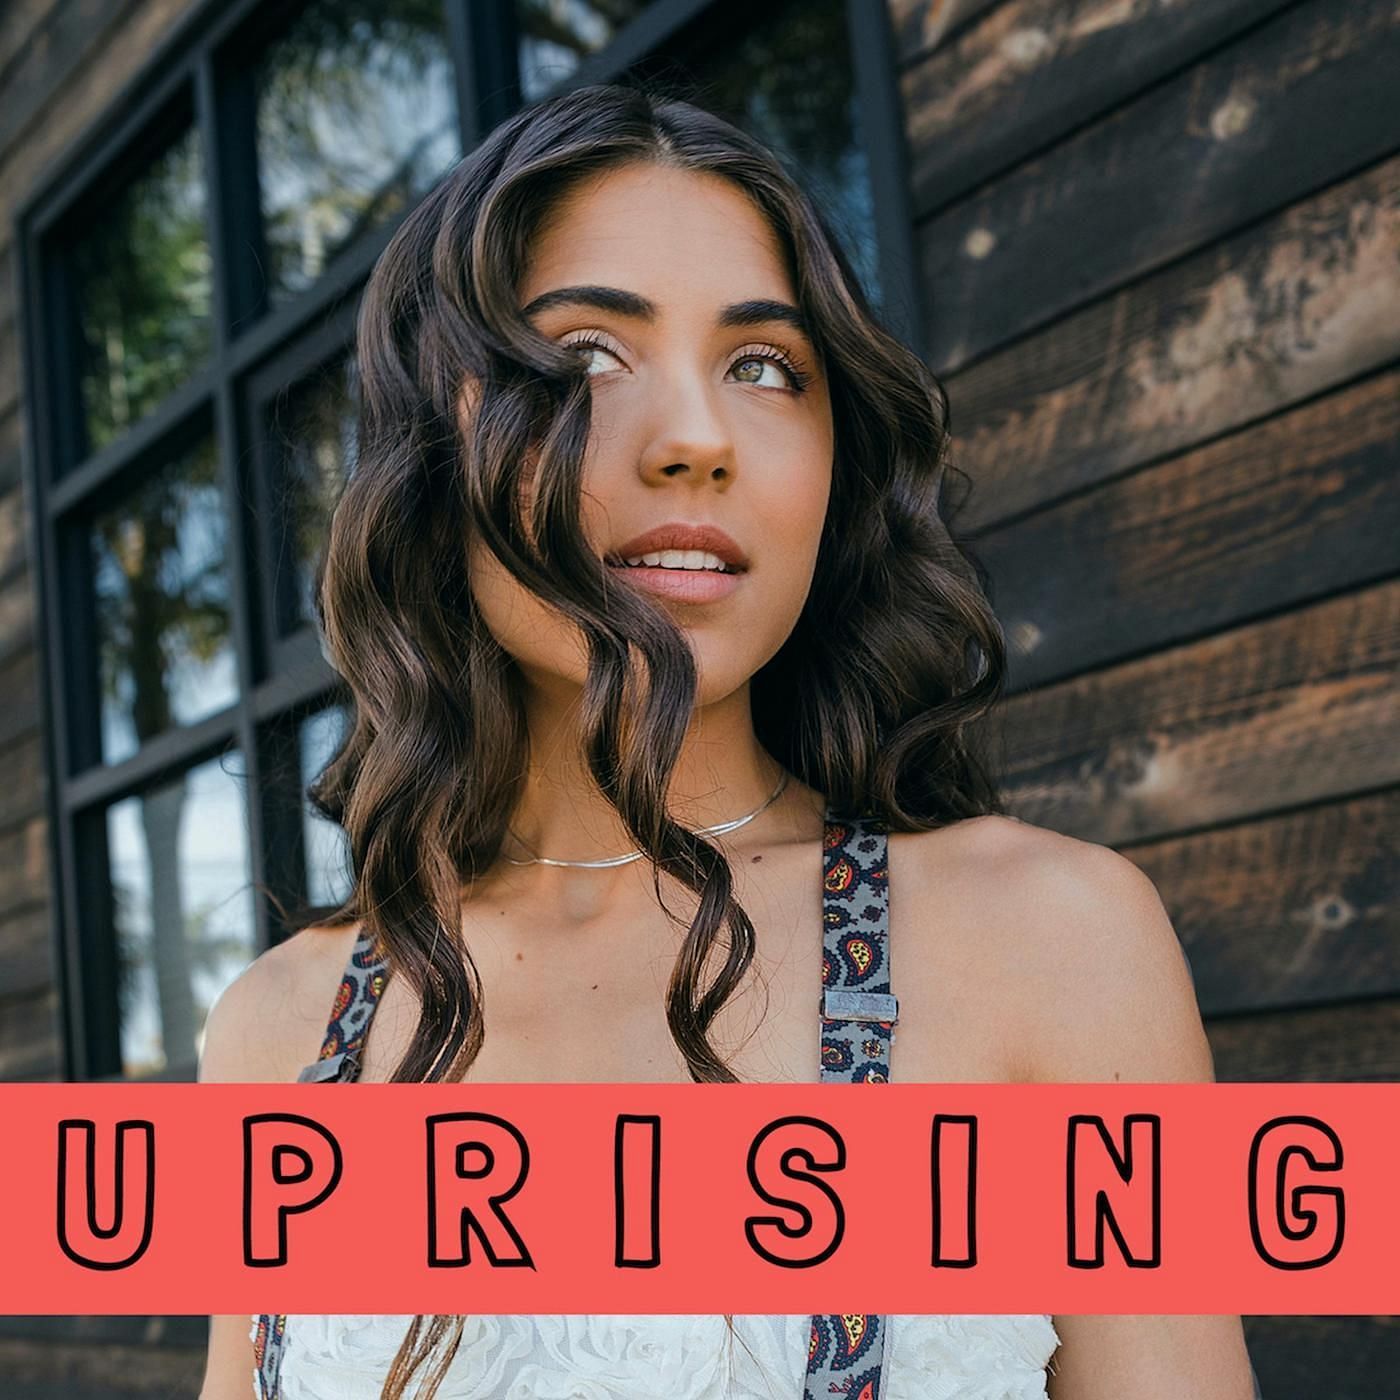 Avianna Mynhier&#039;s podcast series titled Uprising